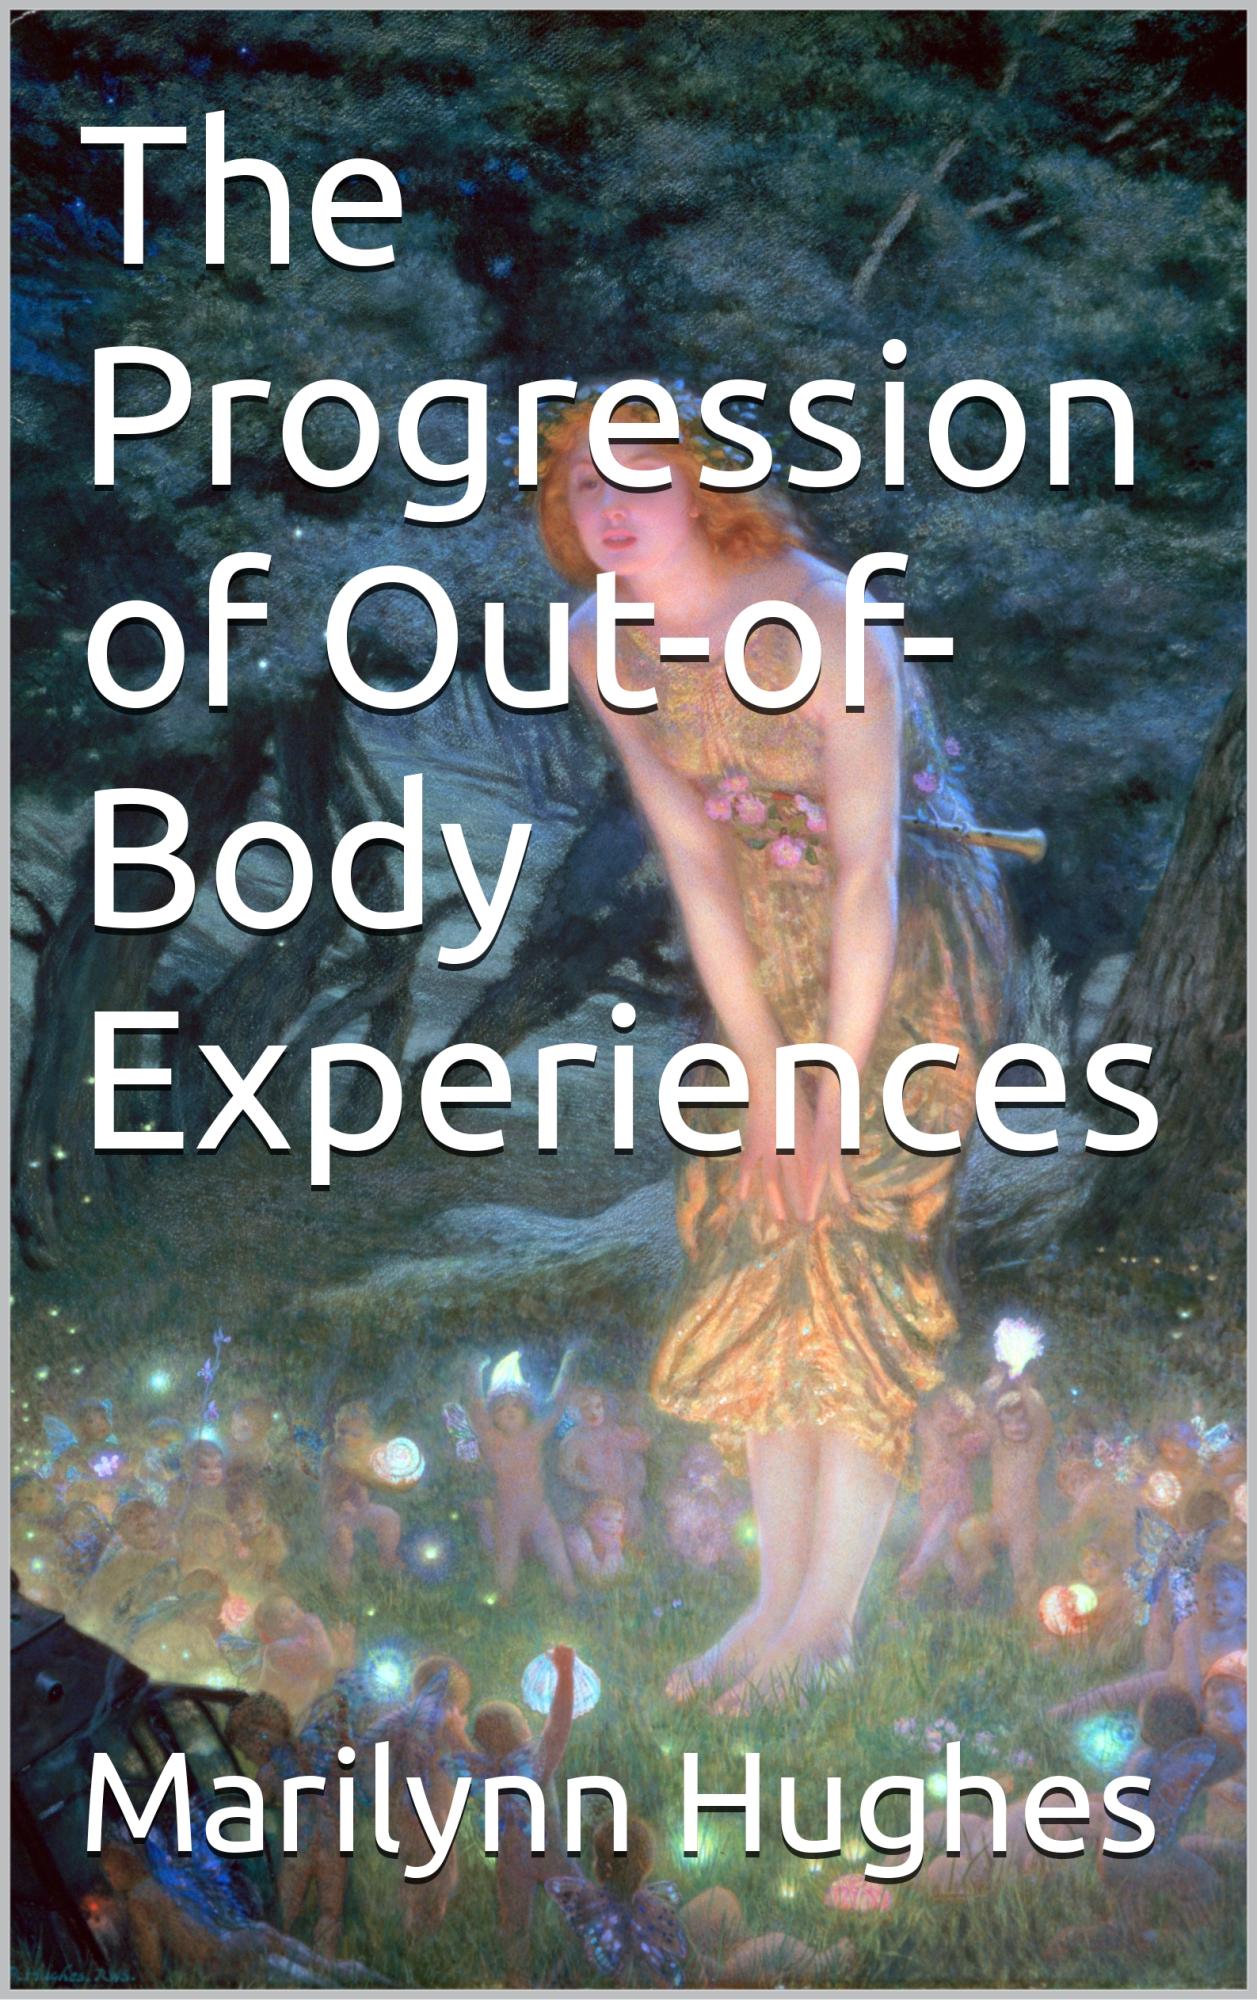 Get a glimpse into the evolutionary nature of how out-of-body experiences progress and how a soul is taken more deeply into wisdom through Astral Travel.